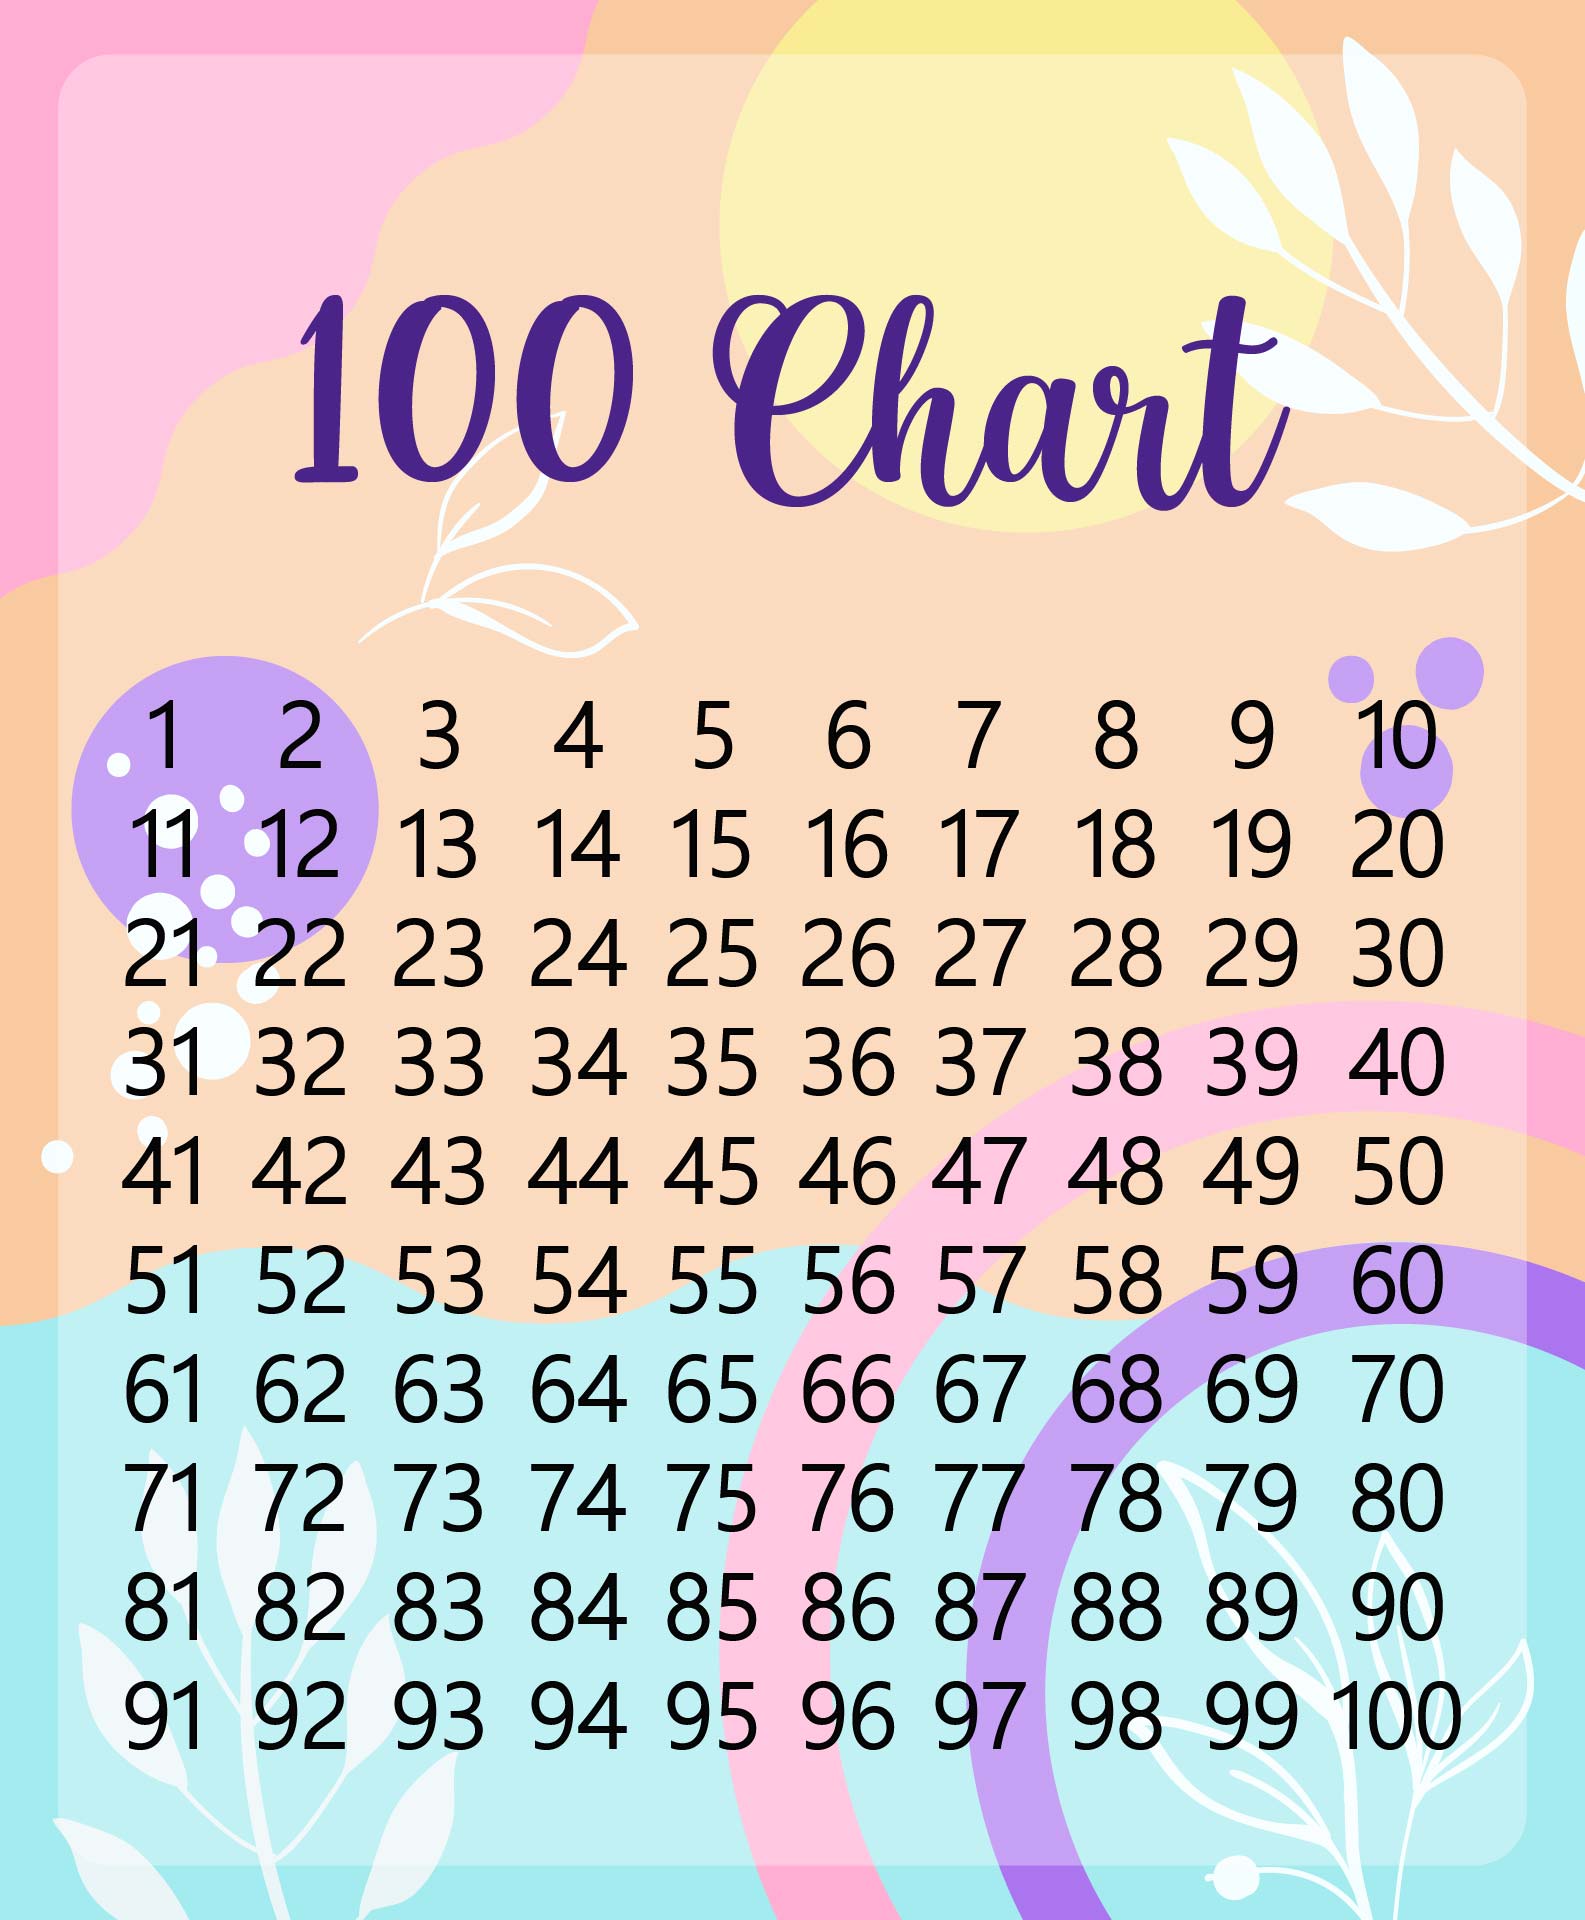 5-best-images-of-free-printable-1-100-chart-printable-number-chart-1-100-large-printable